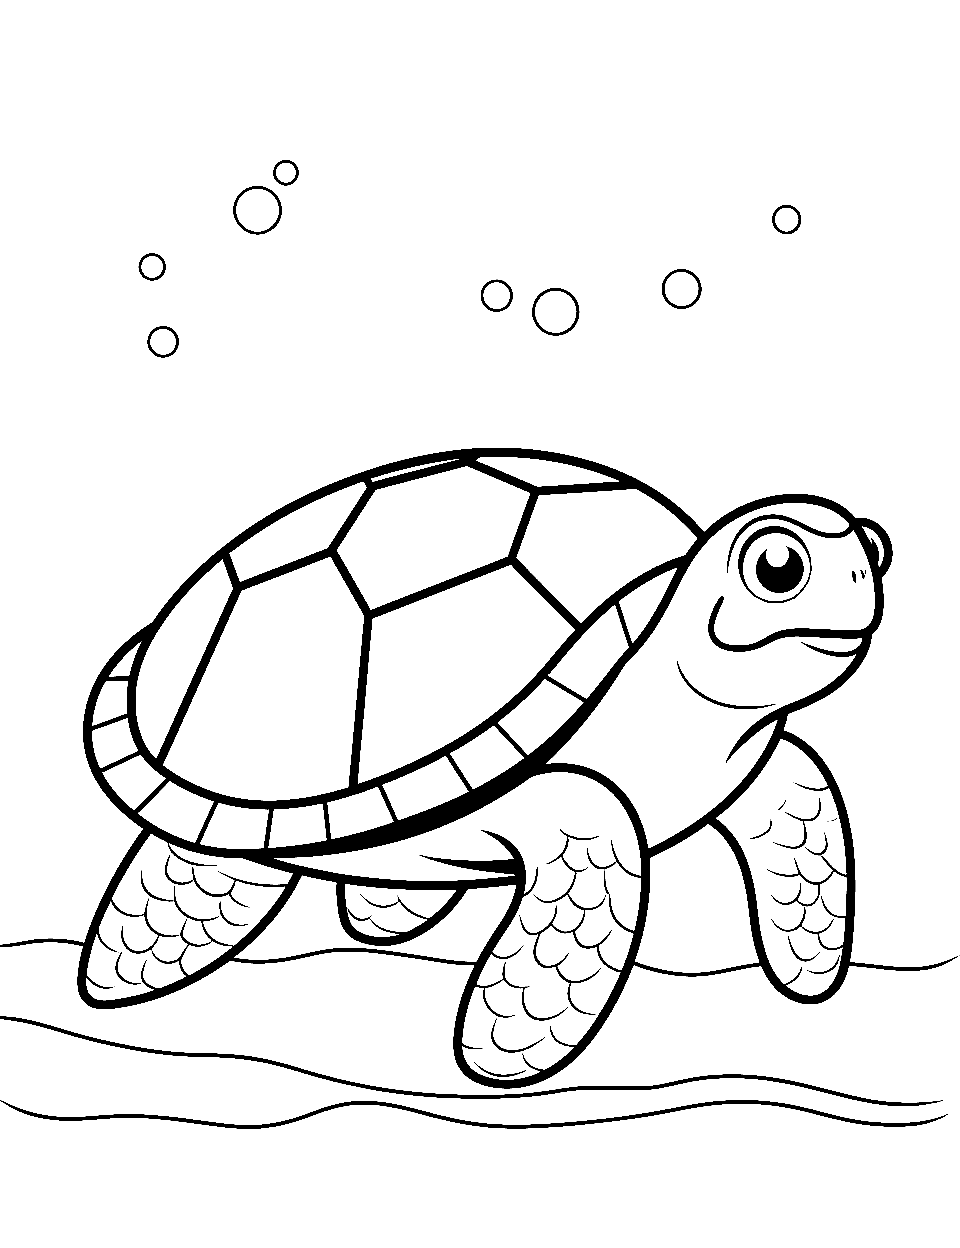 Simple Line Turtle Coloring Page - A simple turtle outline that is perfect for easy coloring.